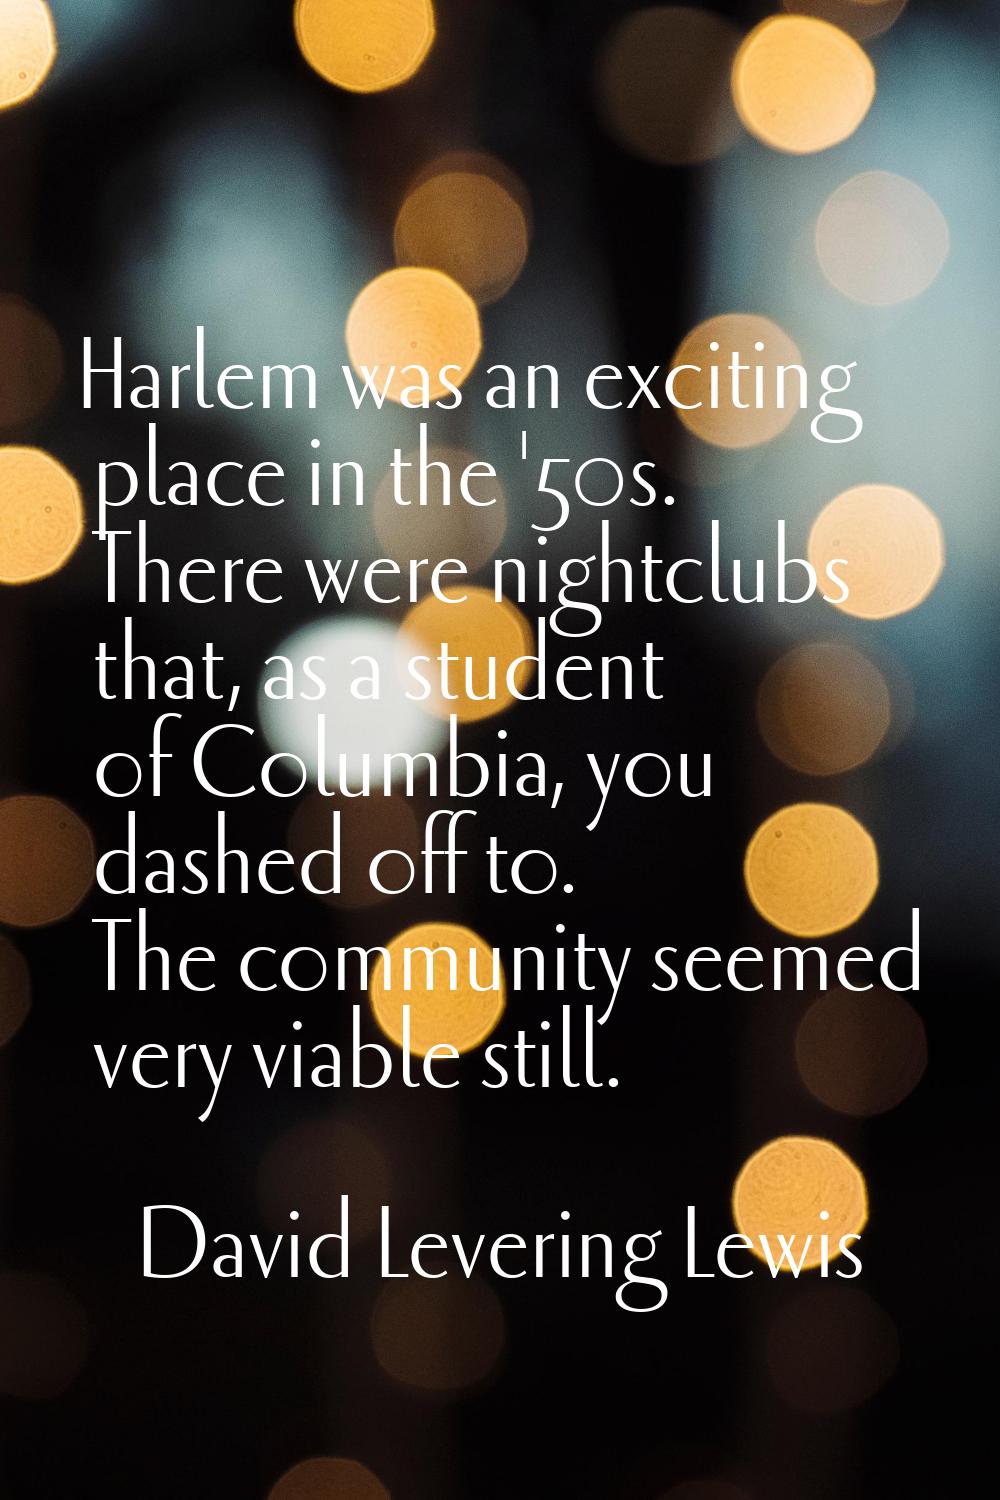 Harlem was an exciting place in the '50s. There were nightclubs that, as a student of Columbia, you